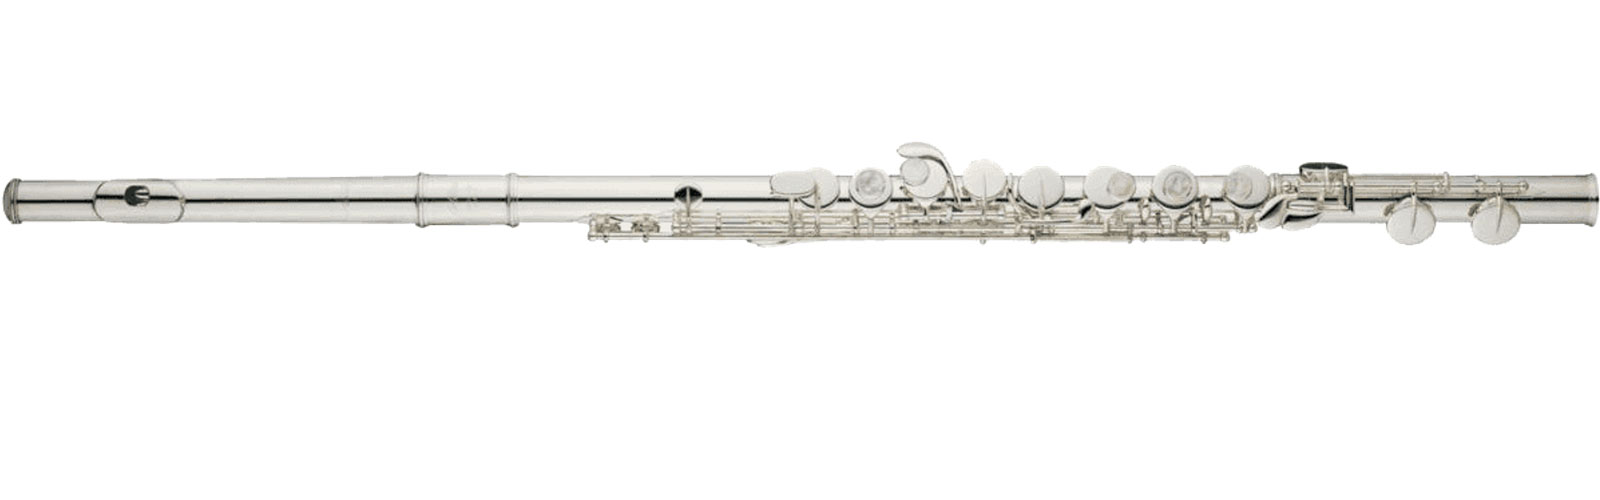 ALTUS ALTO FLUTE WITH STRAIGHT HEAD AND CURVED HEAD IN C AS821E